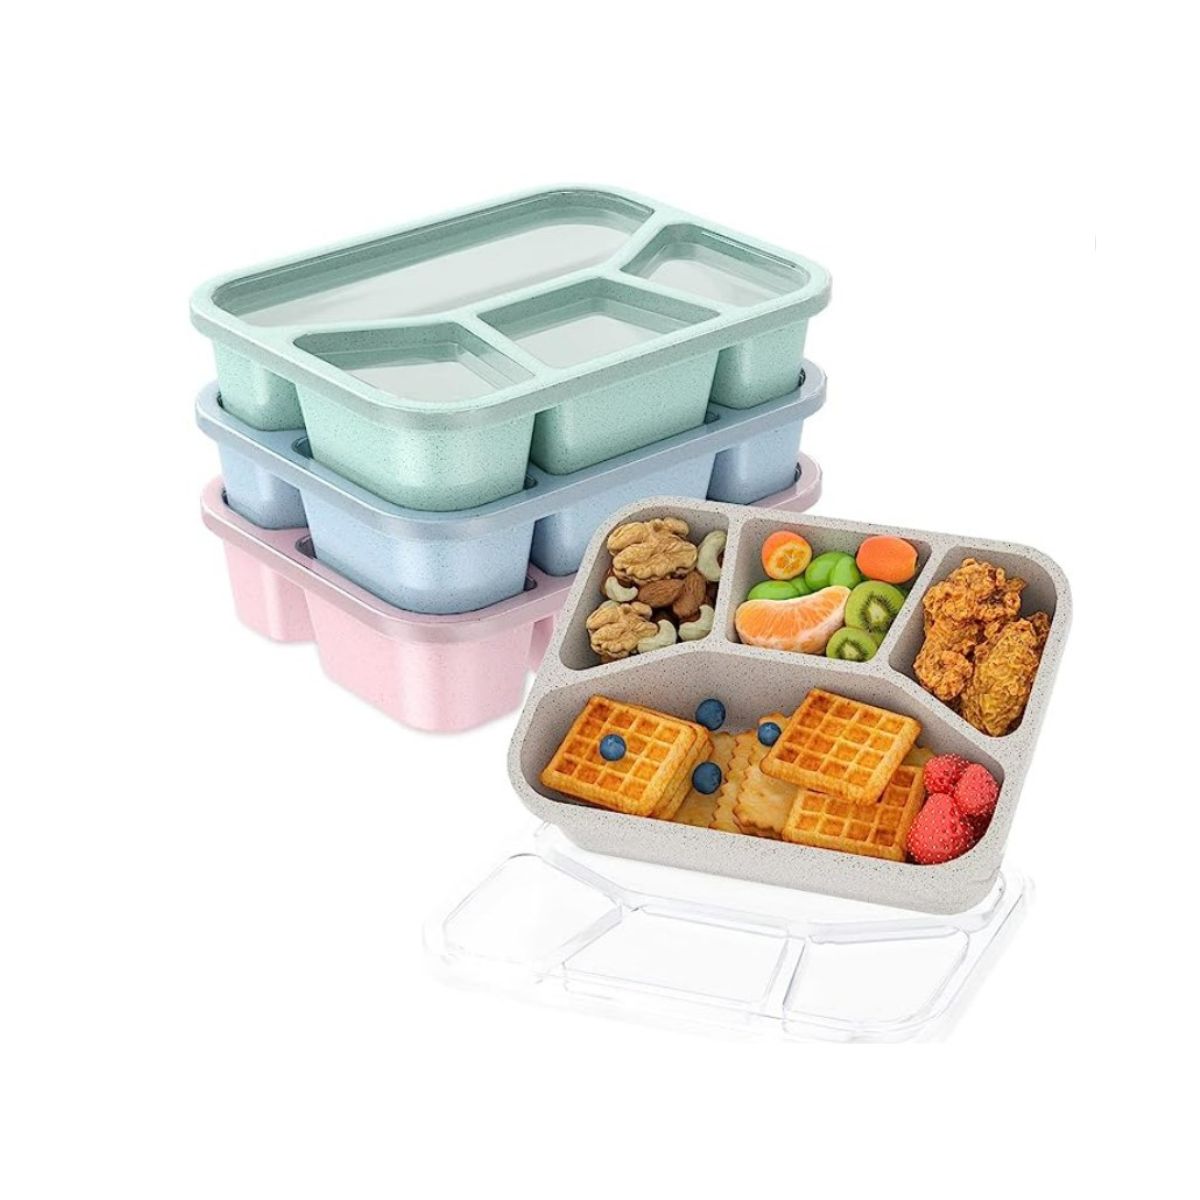 Four stacking bento boxes with lids